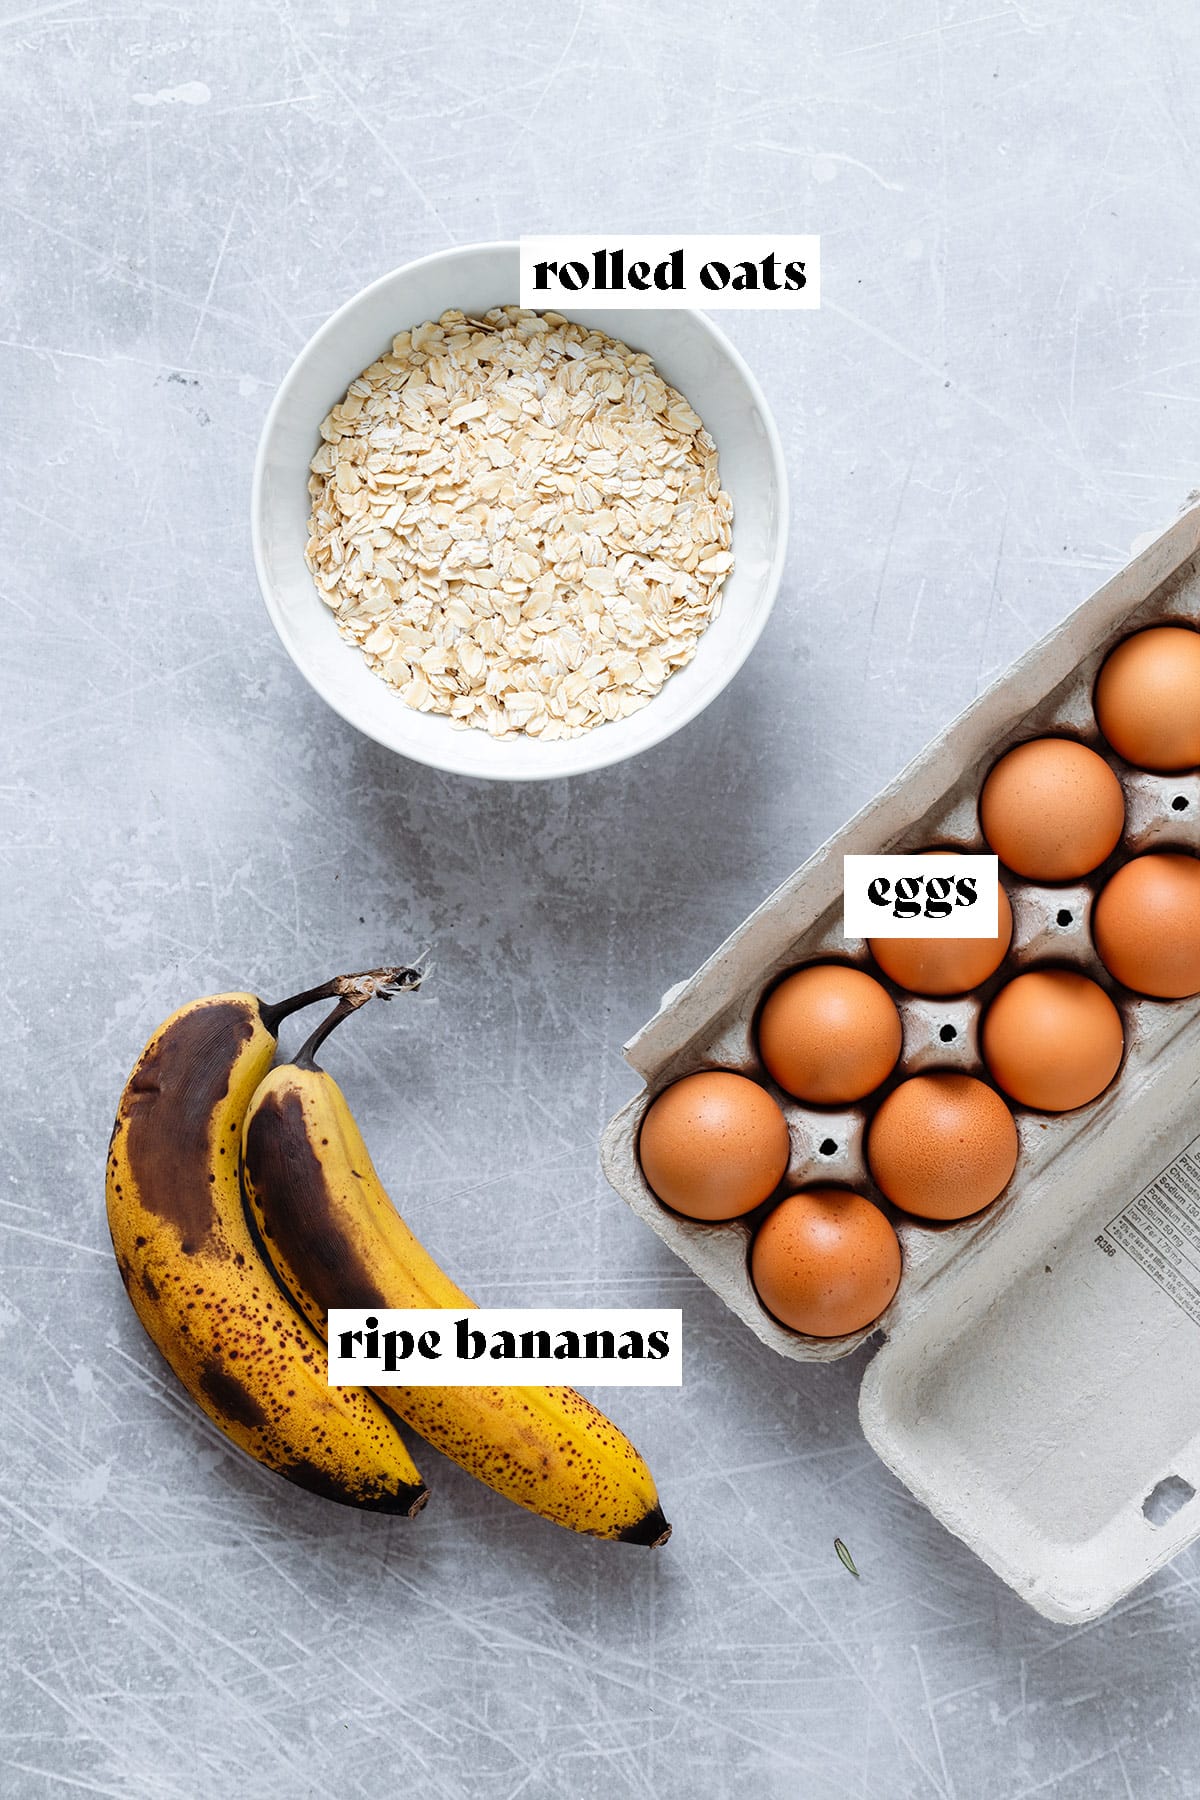 Two bananas, rolled oats in a bowl, and eggs in an egg carton on a grey background.